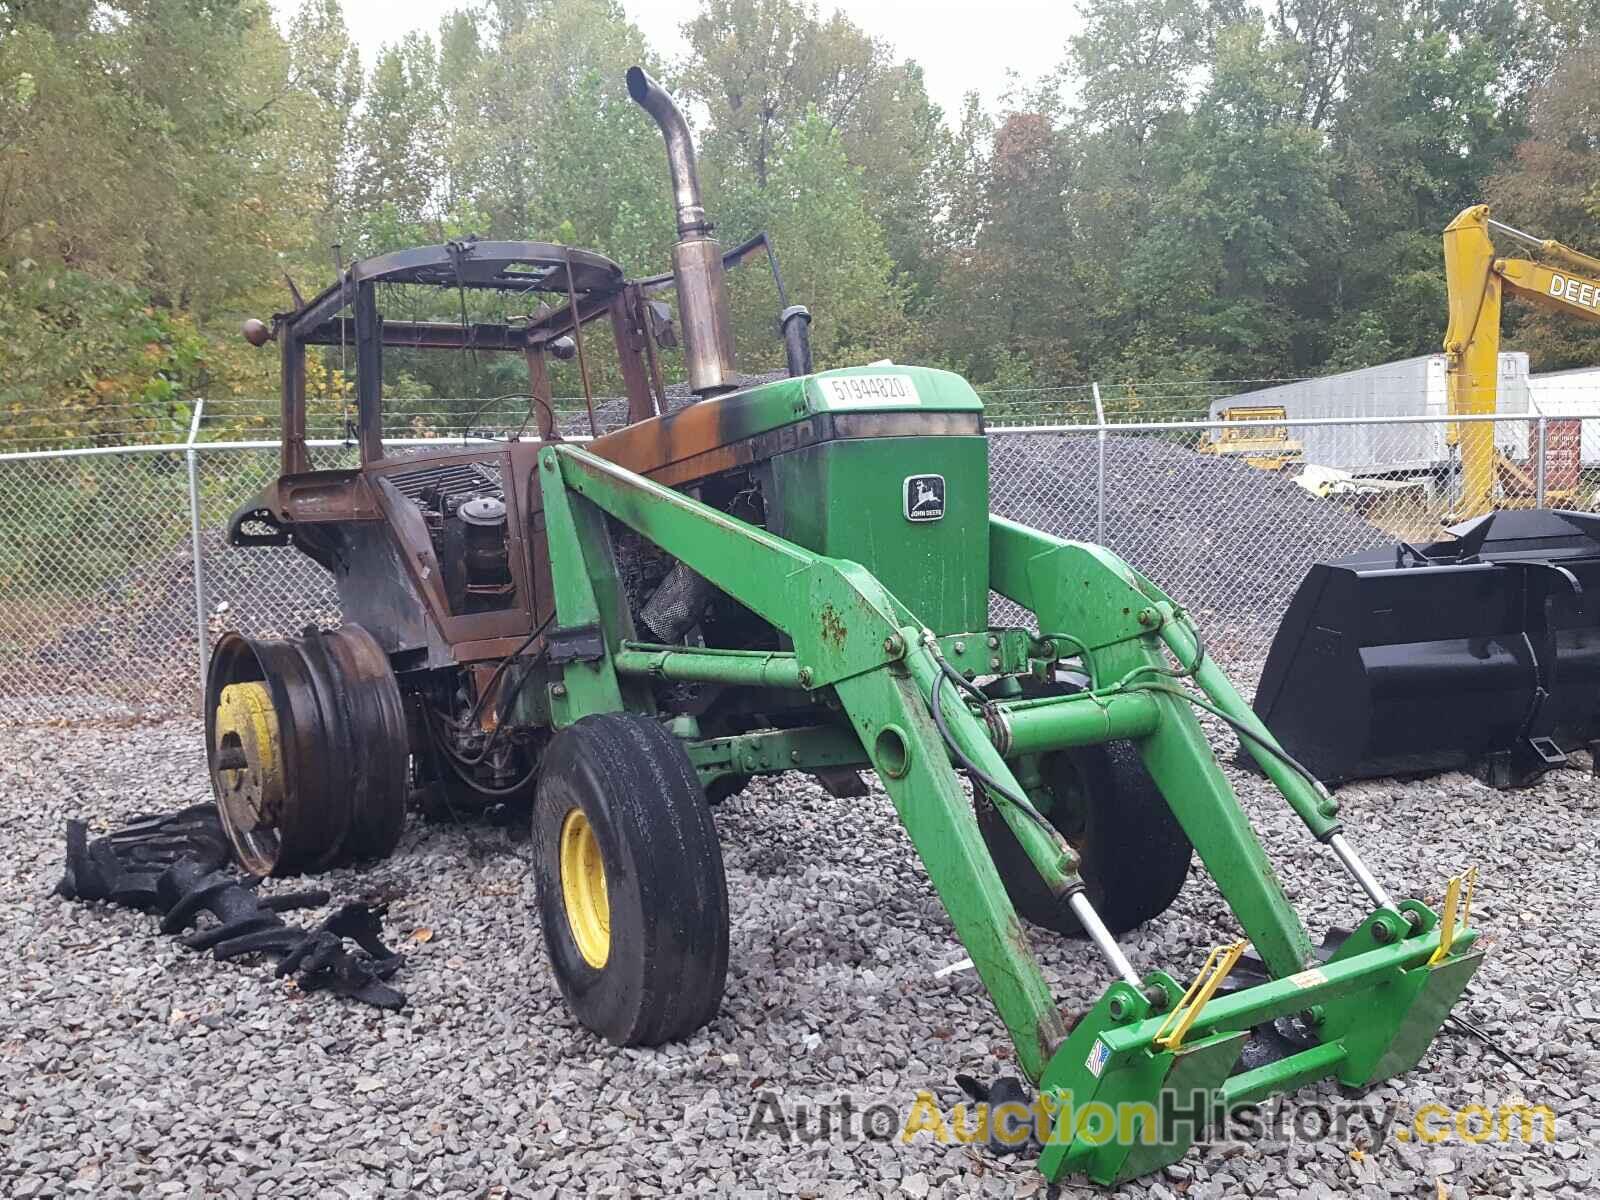 1988 JOHN DEERE TRACTOR, PARTS0NLY4820